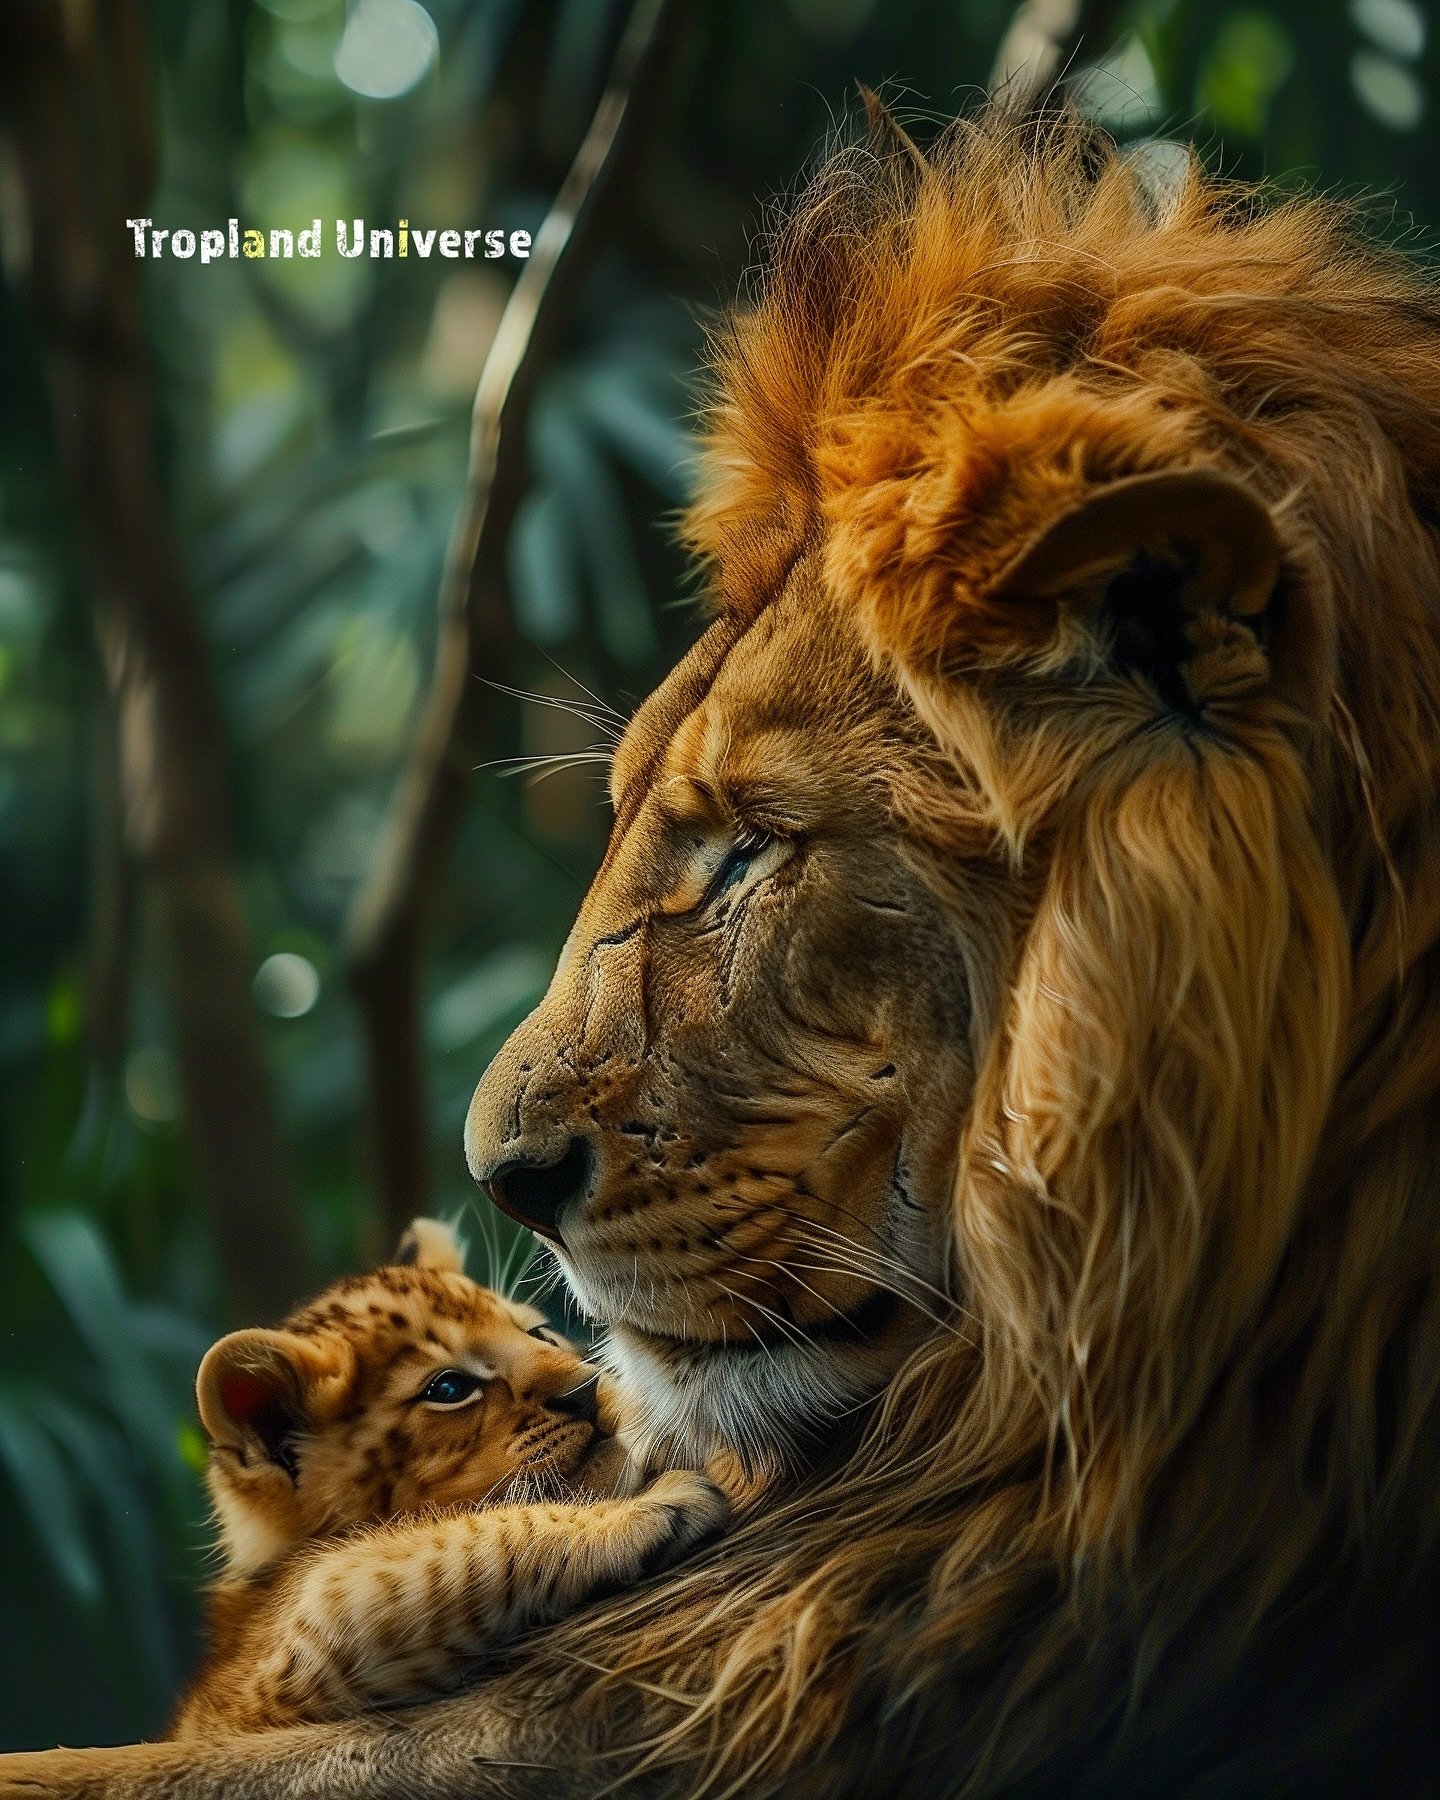 I got your back, my sweet Prince. ❤️🦁

🦁 Follow me @troplanduniverse for more never-before-seen images from the digital animal kingdom. 

📸 This is not a photograph. I used generative ai combined with my design skills to create this image.

If you